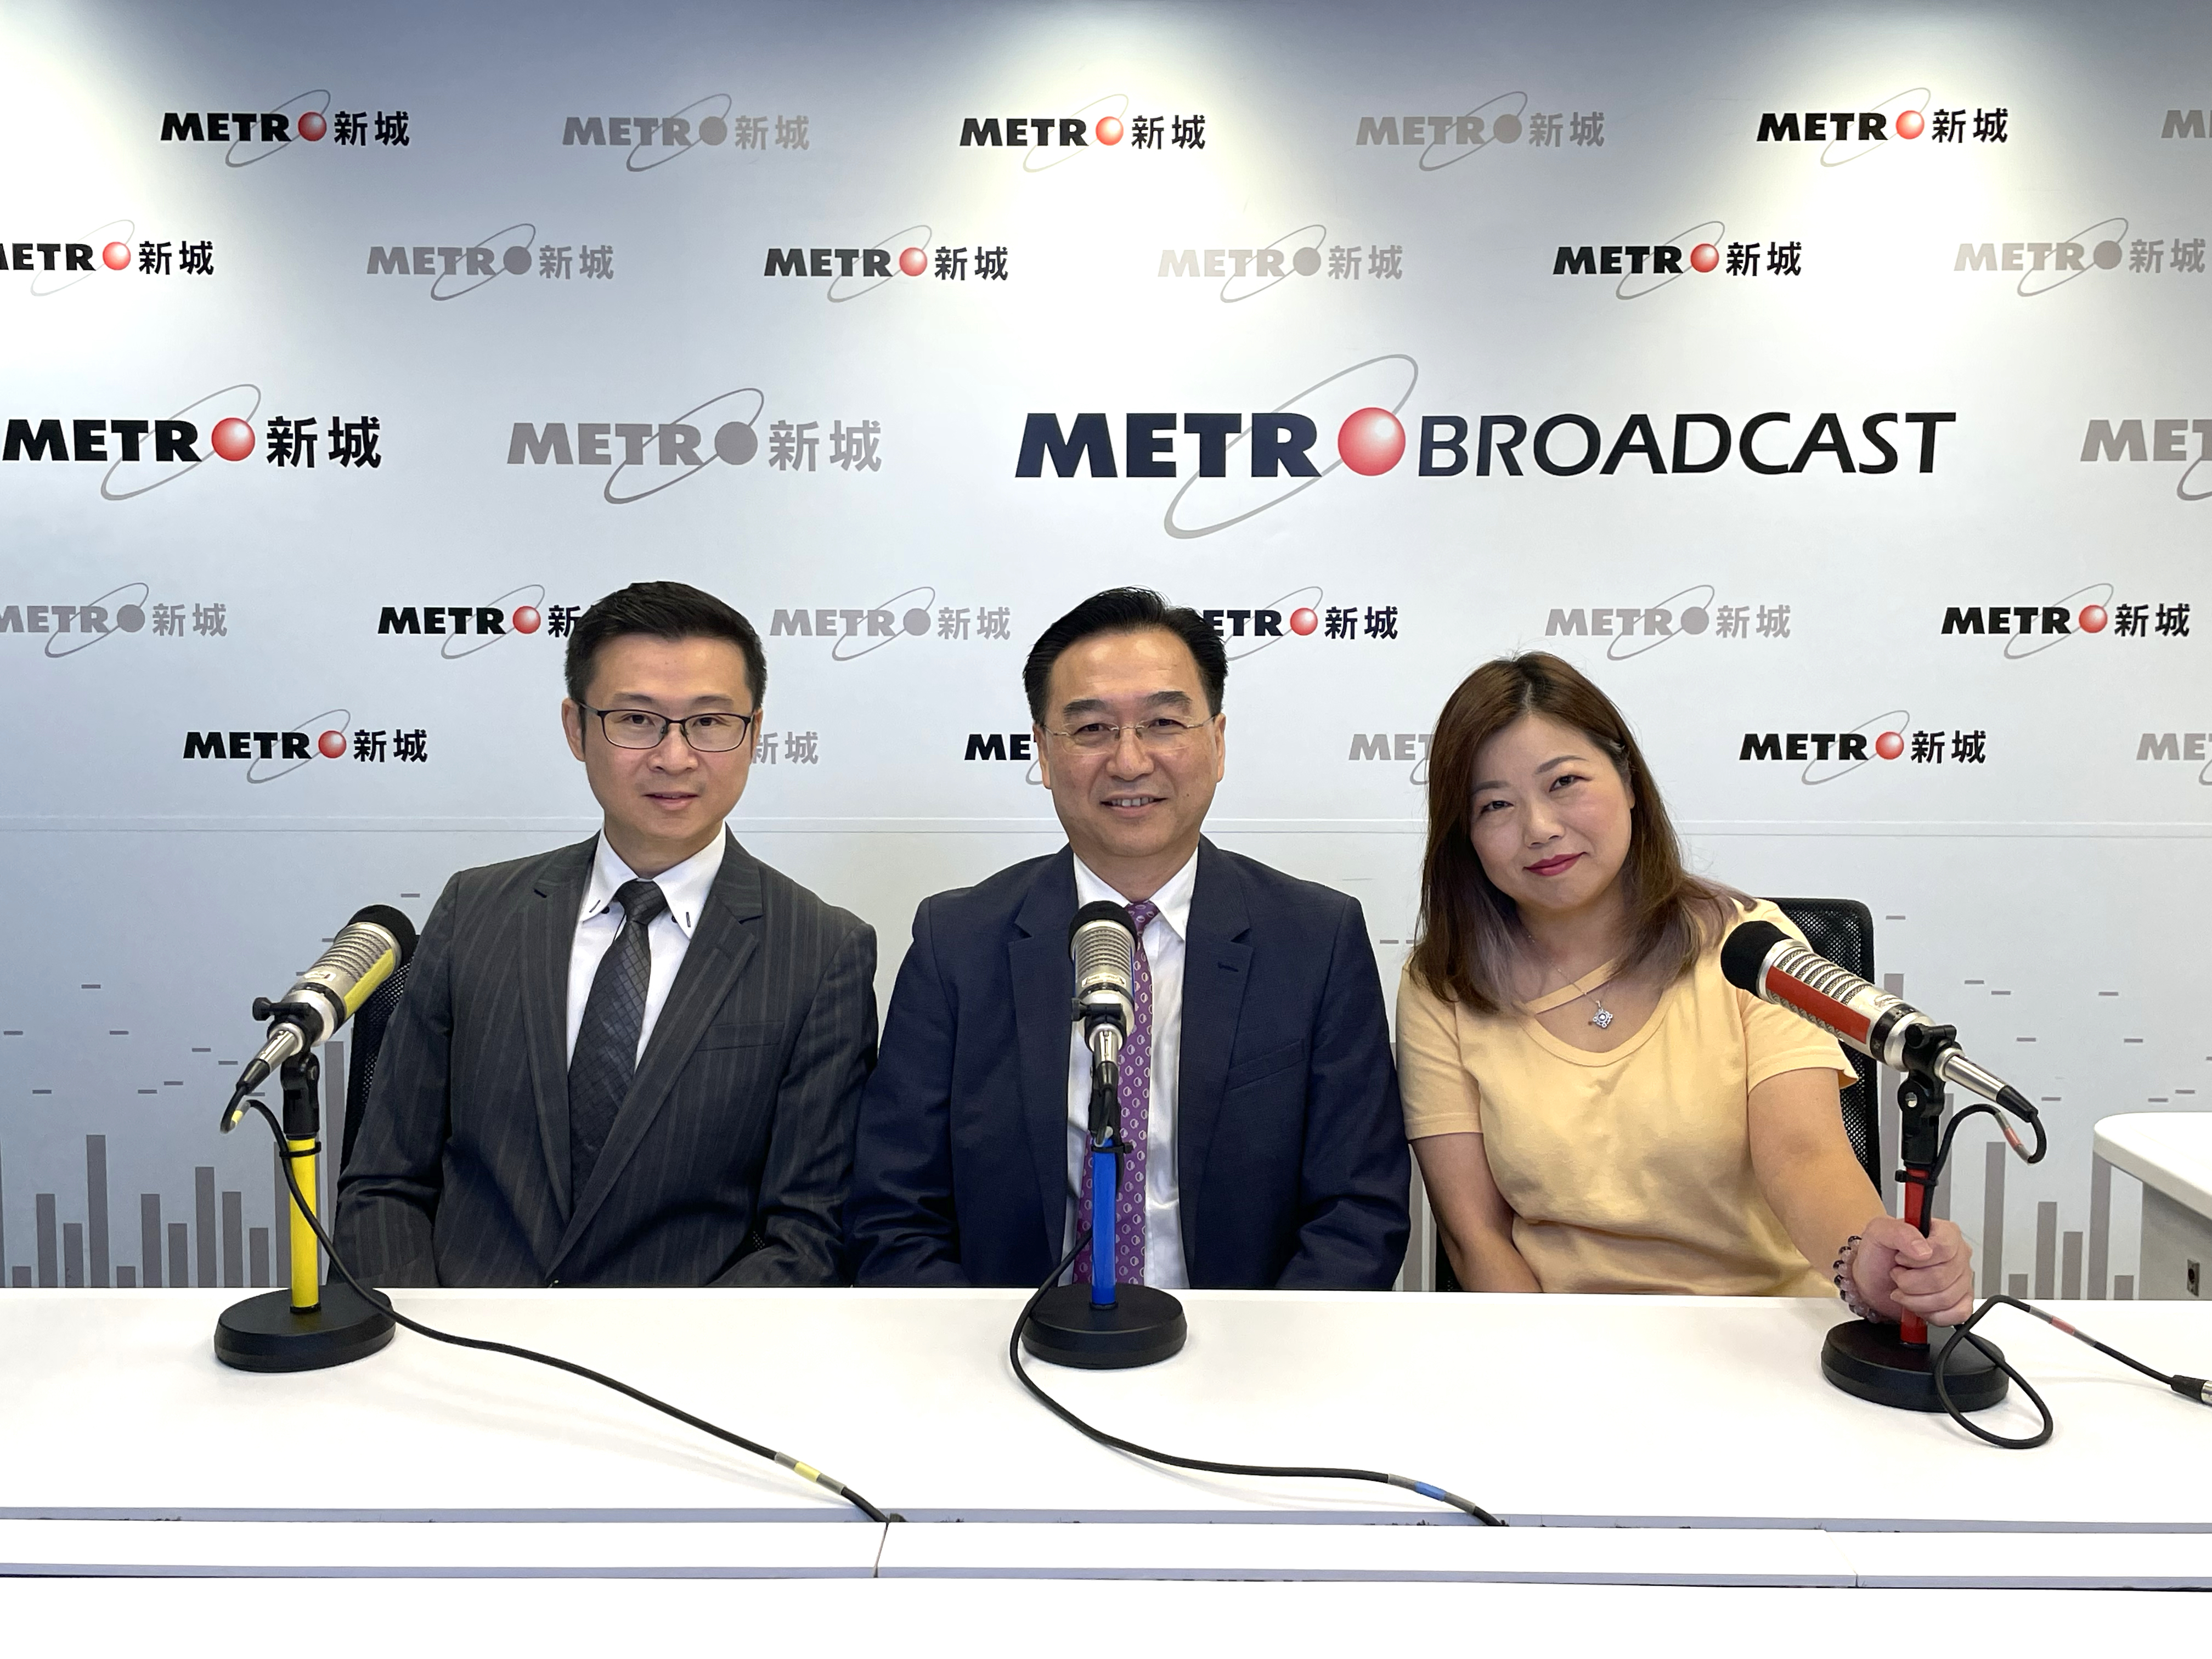 Mr. Romulus Wong, Chairman of the CIHAPB (Chartered Institute of Housing Asian Pacific Branch), and Mr. Edmond Cheung, Deputy Chairman of the CIHAPB, have been invited to participate in a radio interview